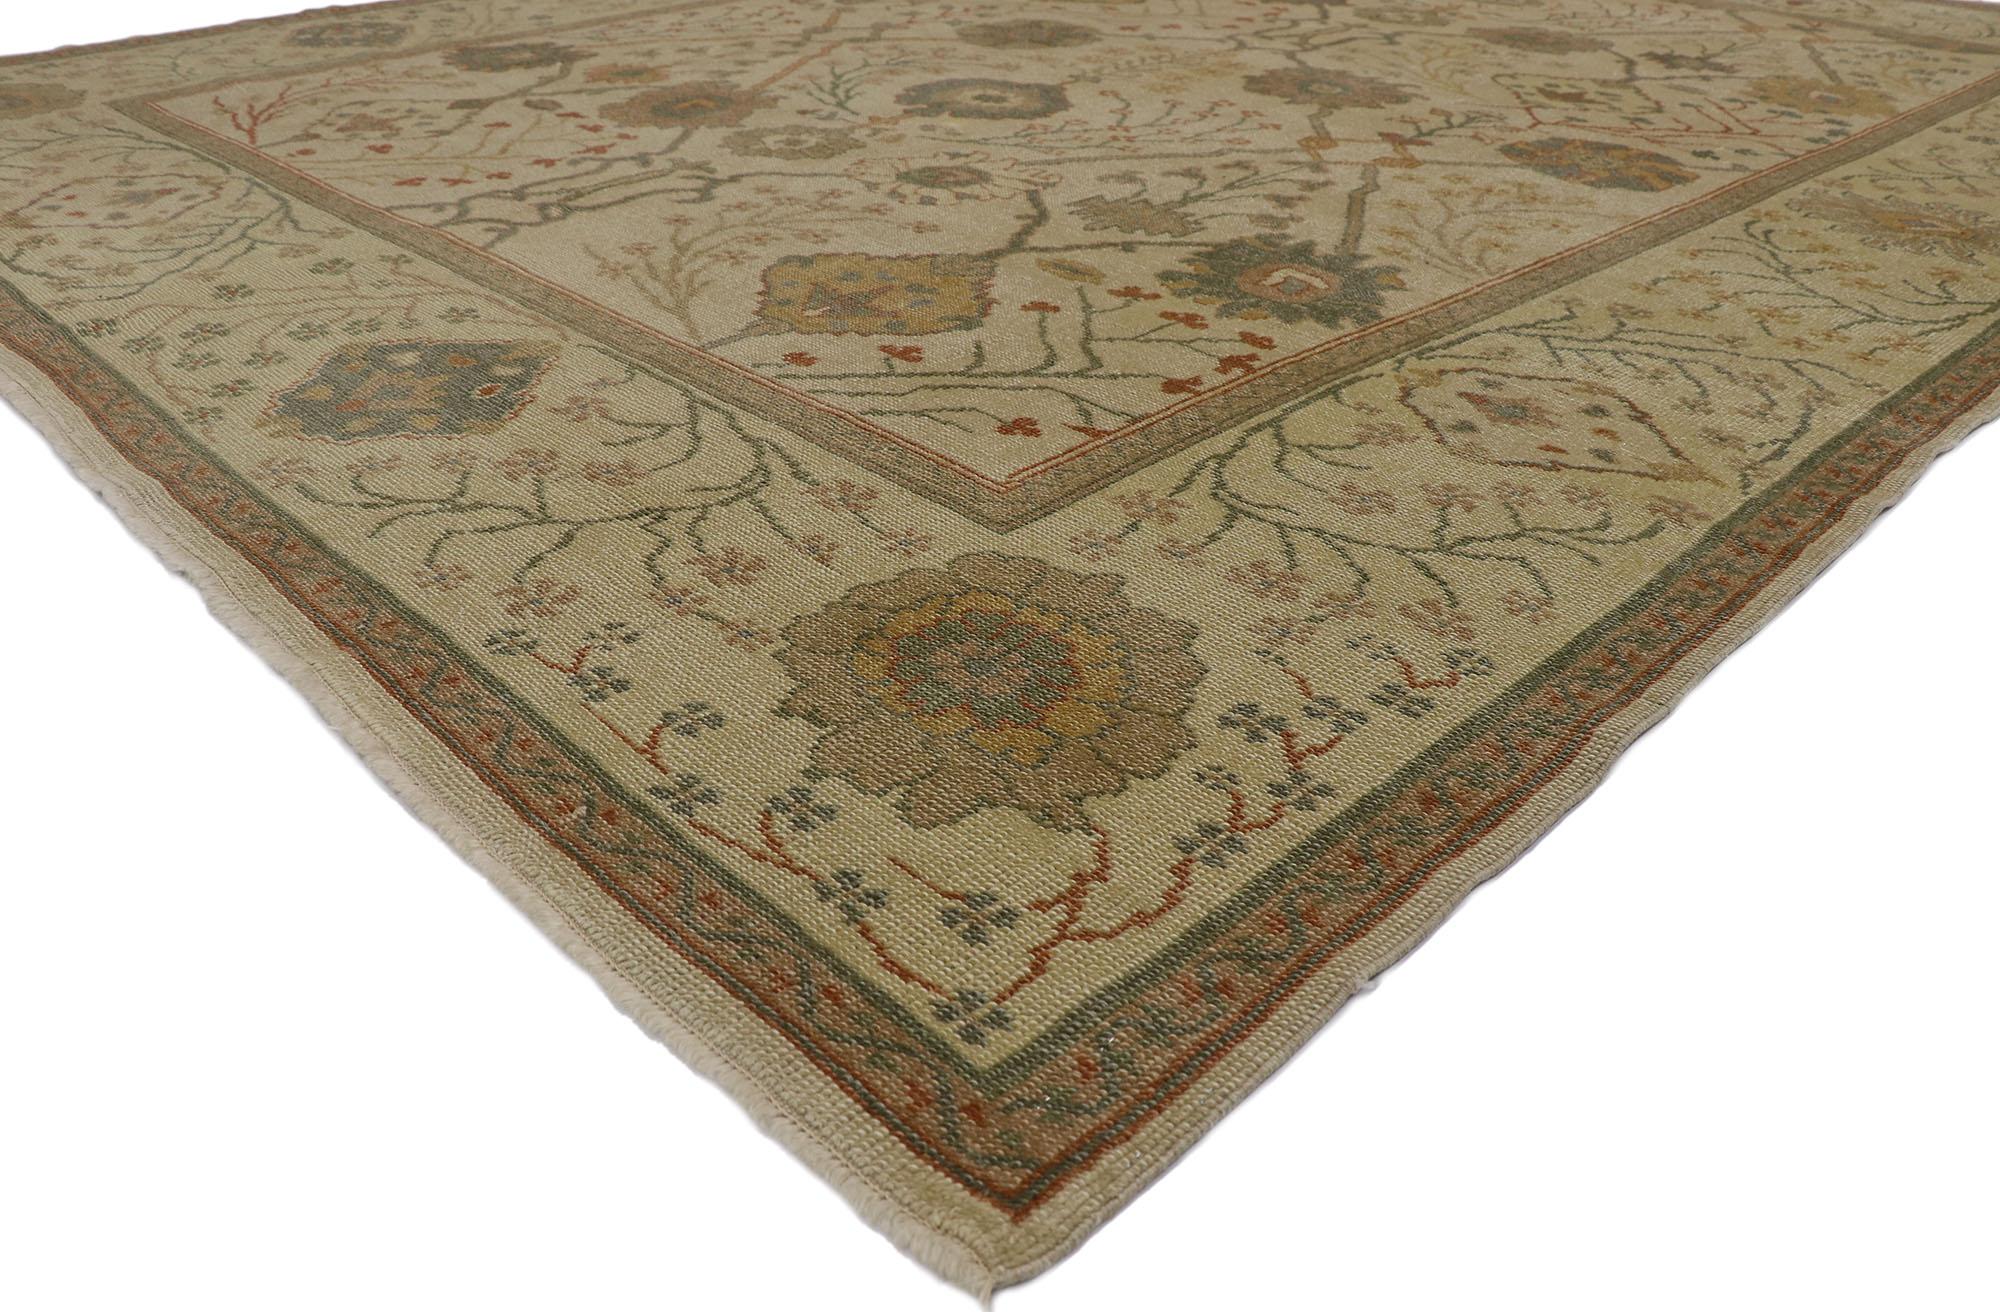 78152 new Contemporary Turkish oushak rug with Arts and Crafts style 09'05 x 12'01. Warm and inviting with Arts & Crafts style, this hand-knotted wool contemporary Turkish Oushak features an all-over botanical lattice pattern spread across an